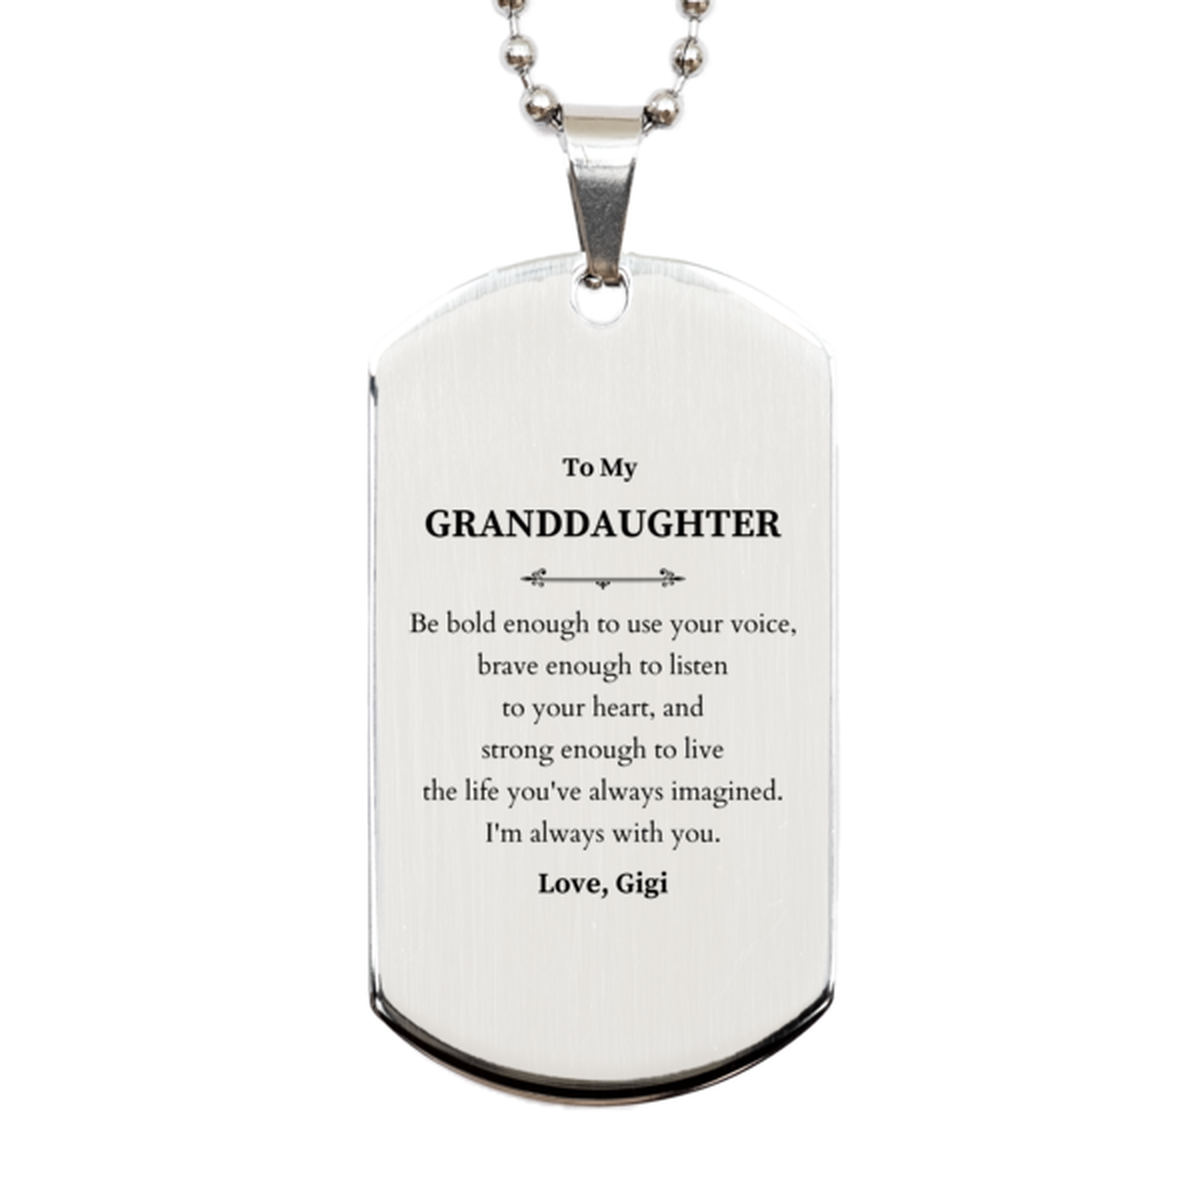 Keepsake Granddaughter Silver Dog Tag Gift Idea Graduation Christmas Birthday Granddaughter from Gigi, Granddaughter Be bold enough to use your voice, brave enough to listen to your heart. Love, Gigi